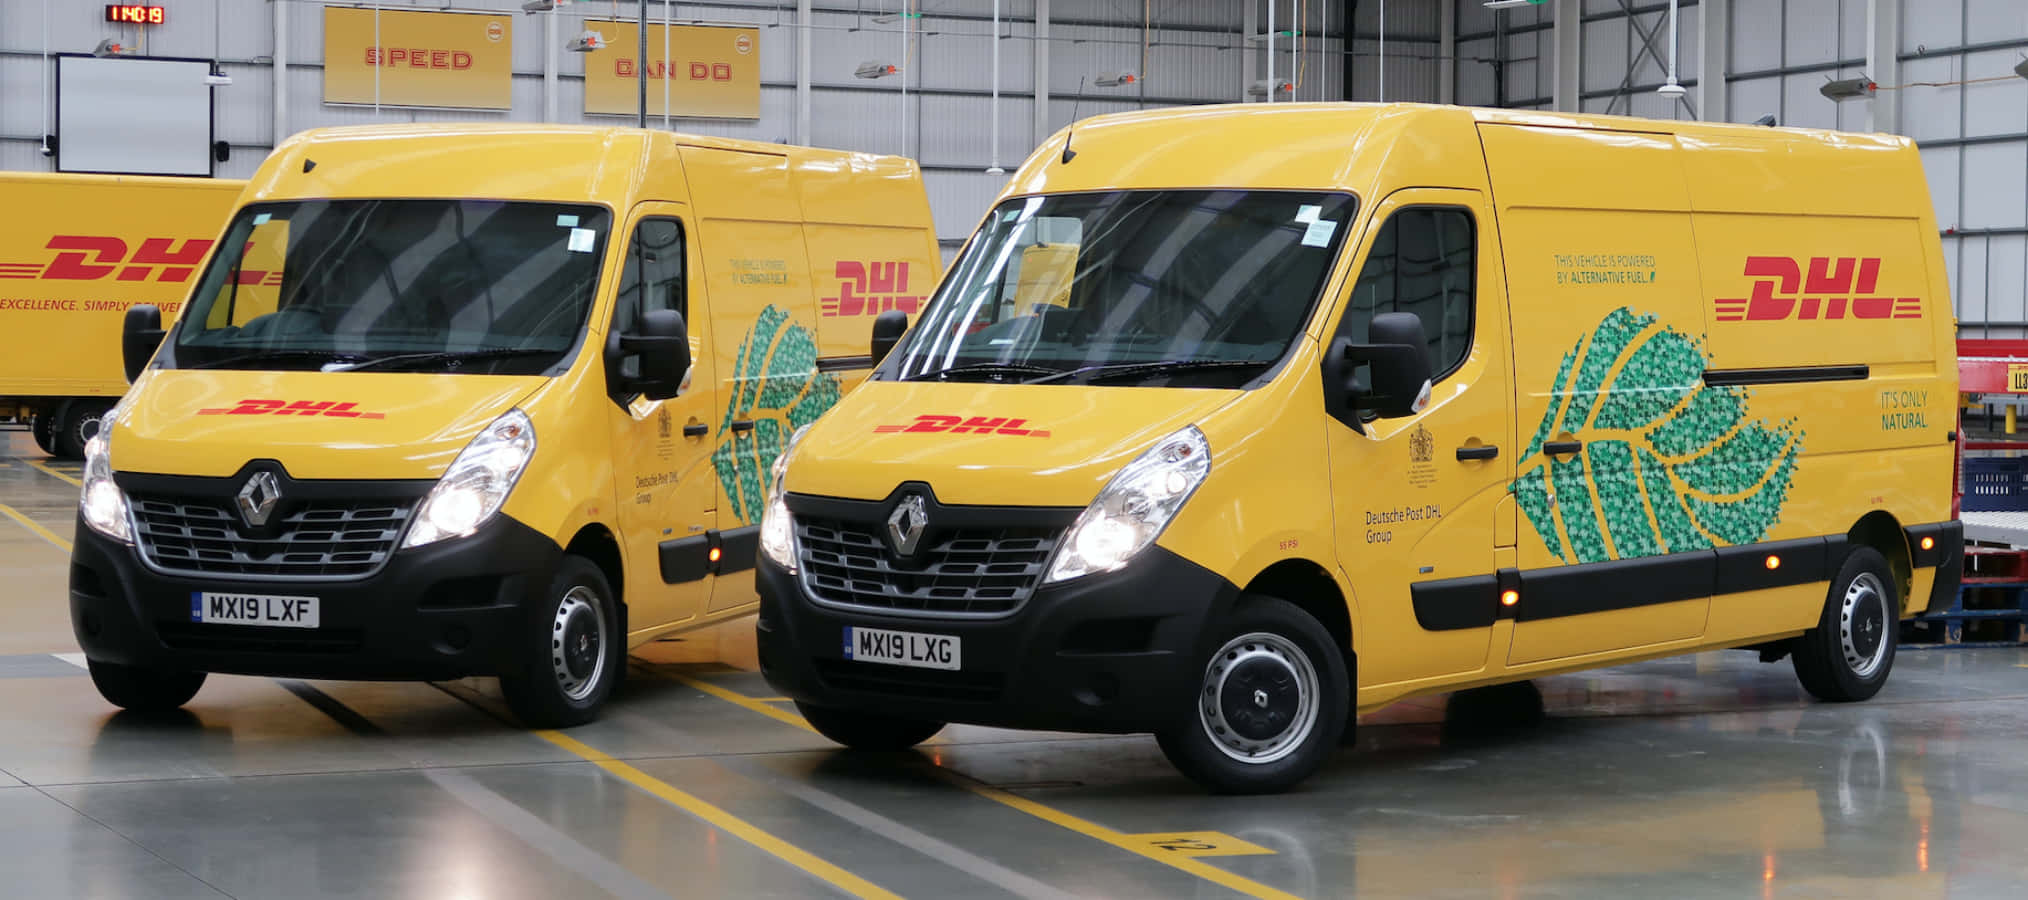 DHL and the Environment